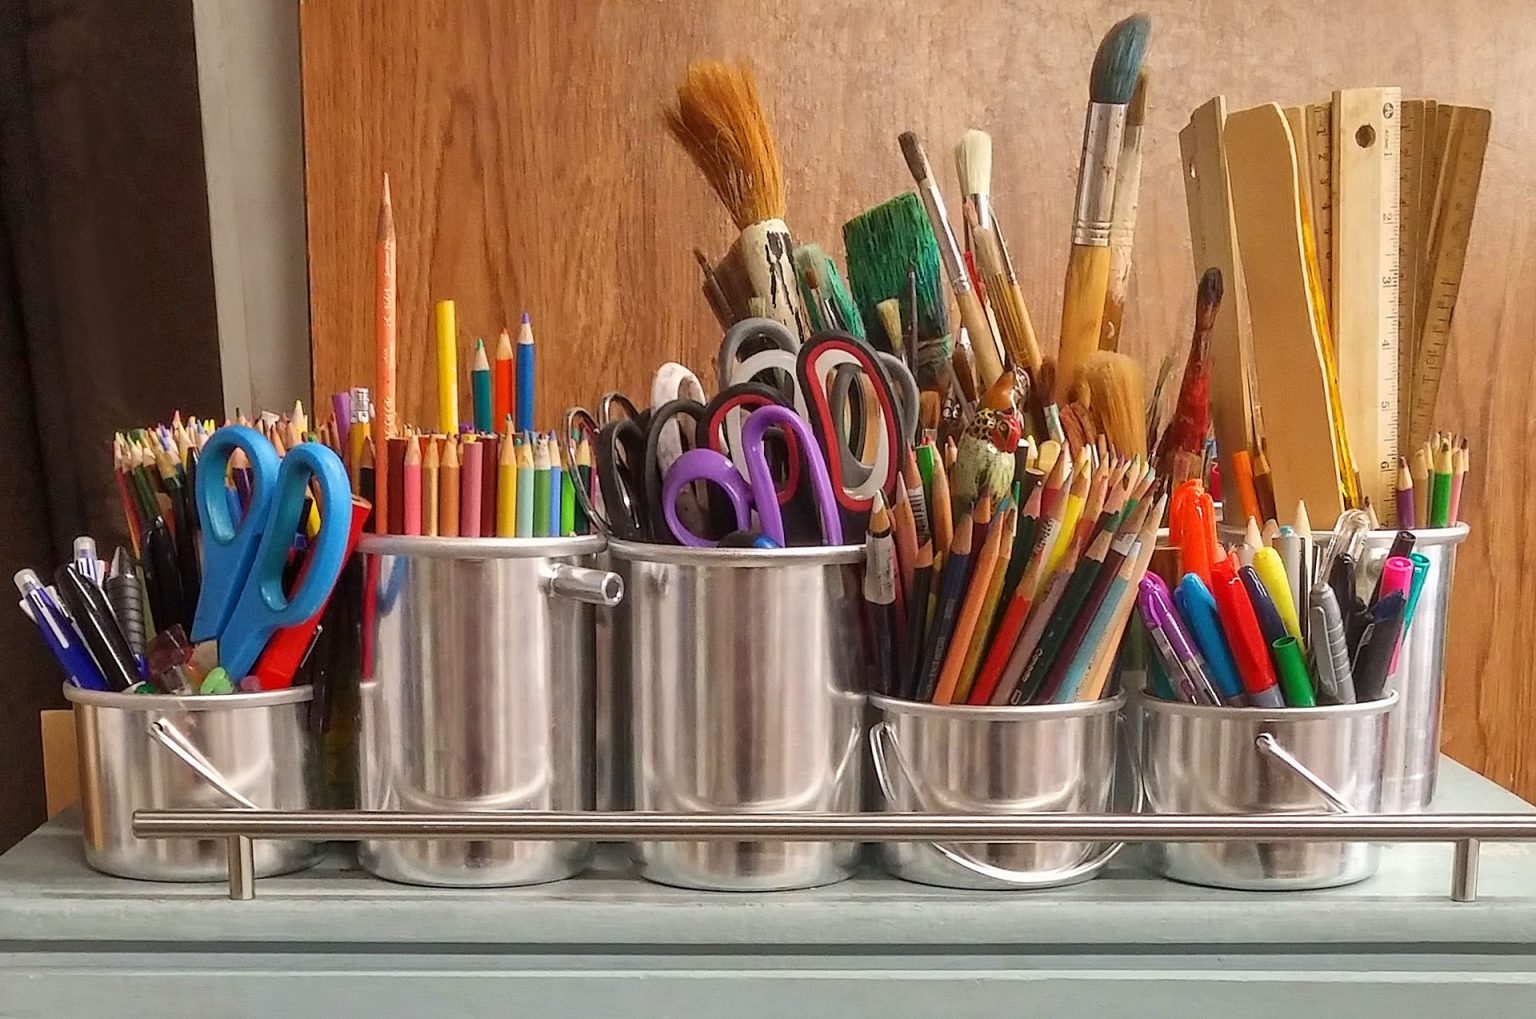 Various art supplies in metal containers on a wooden table including colored pencils, paint brushes, scissors, markers, and a ruler.